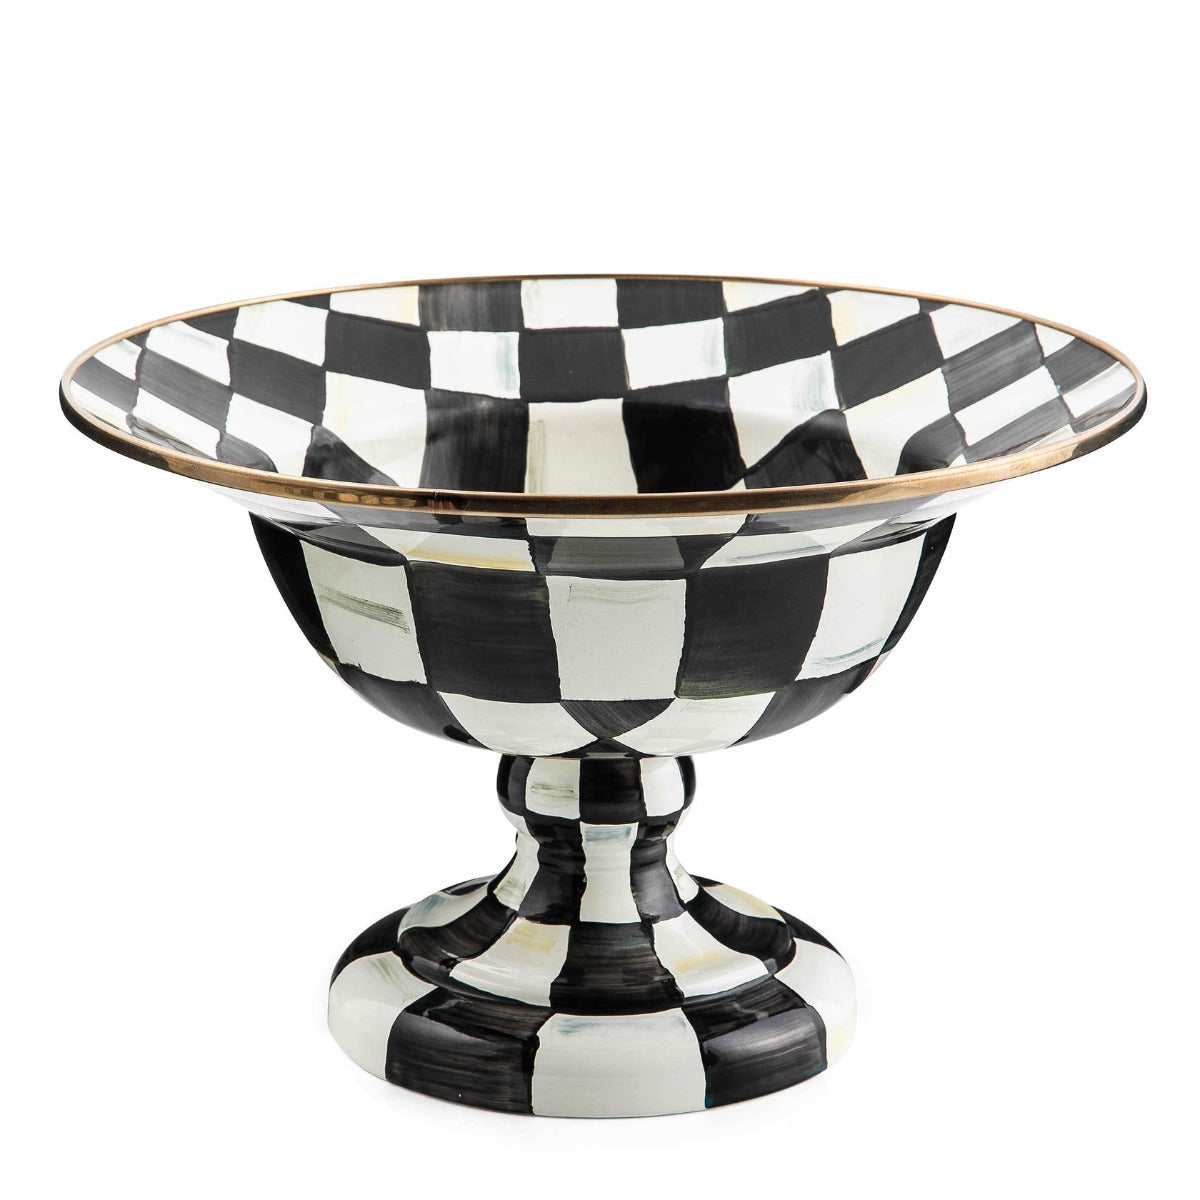 Mackenzie-Childs Courtly Check Enamel Compote